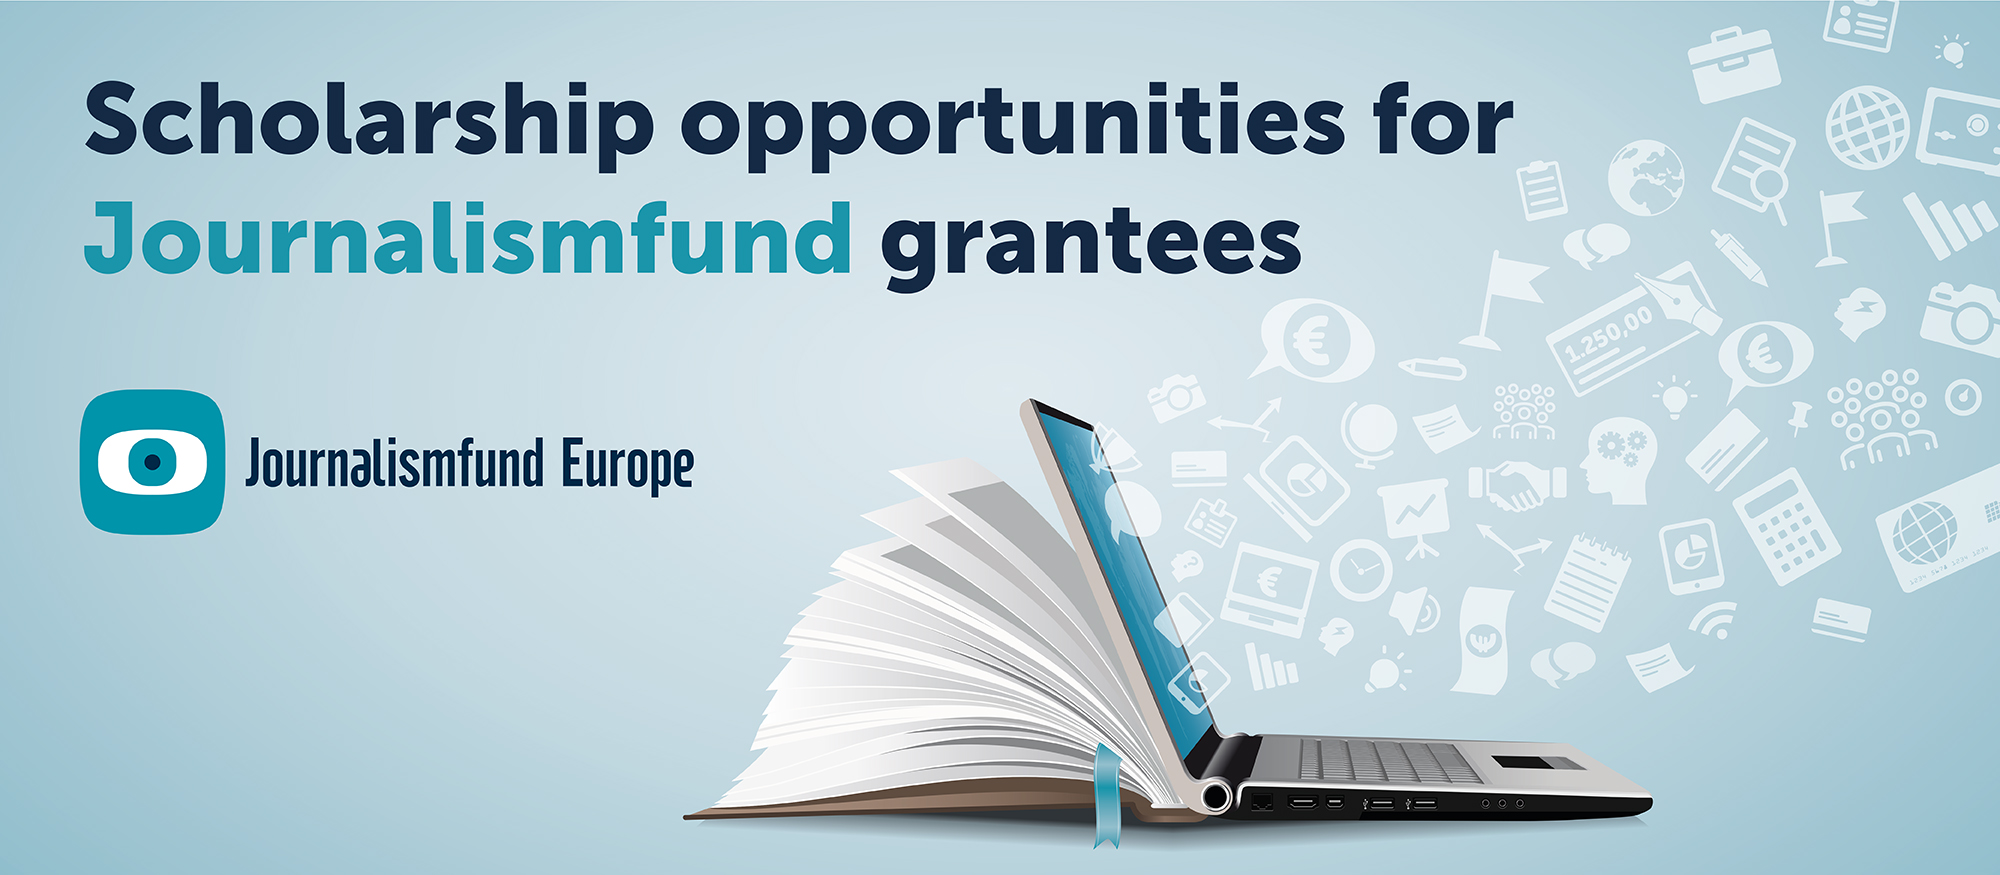 Scholarship opportunities for Journalismfund grantees